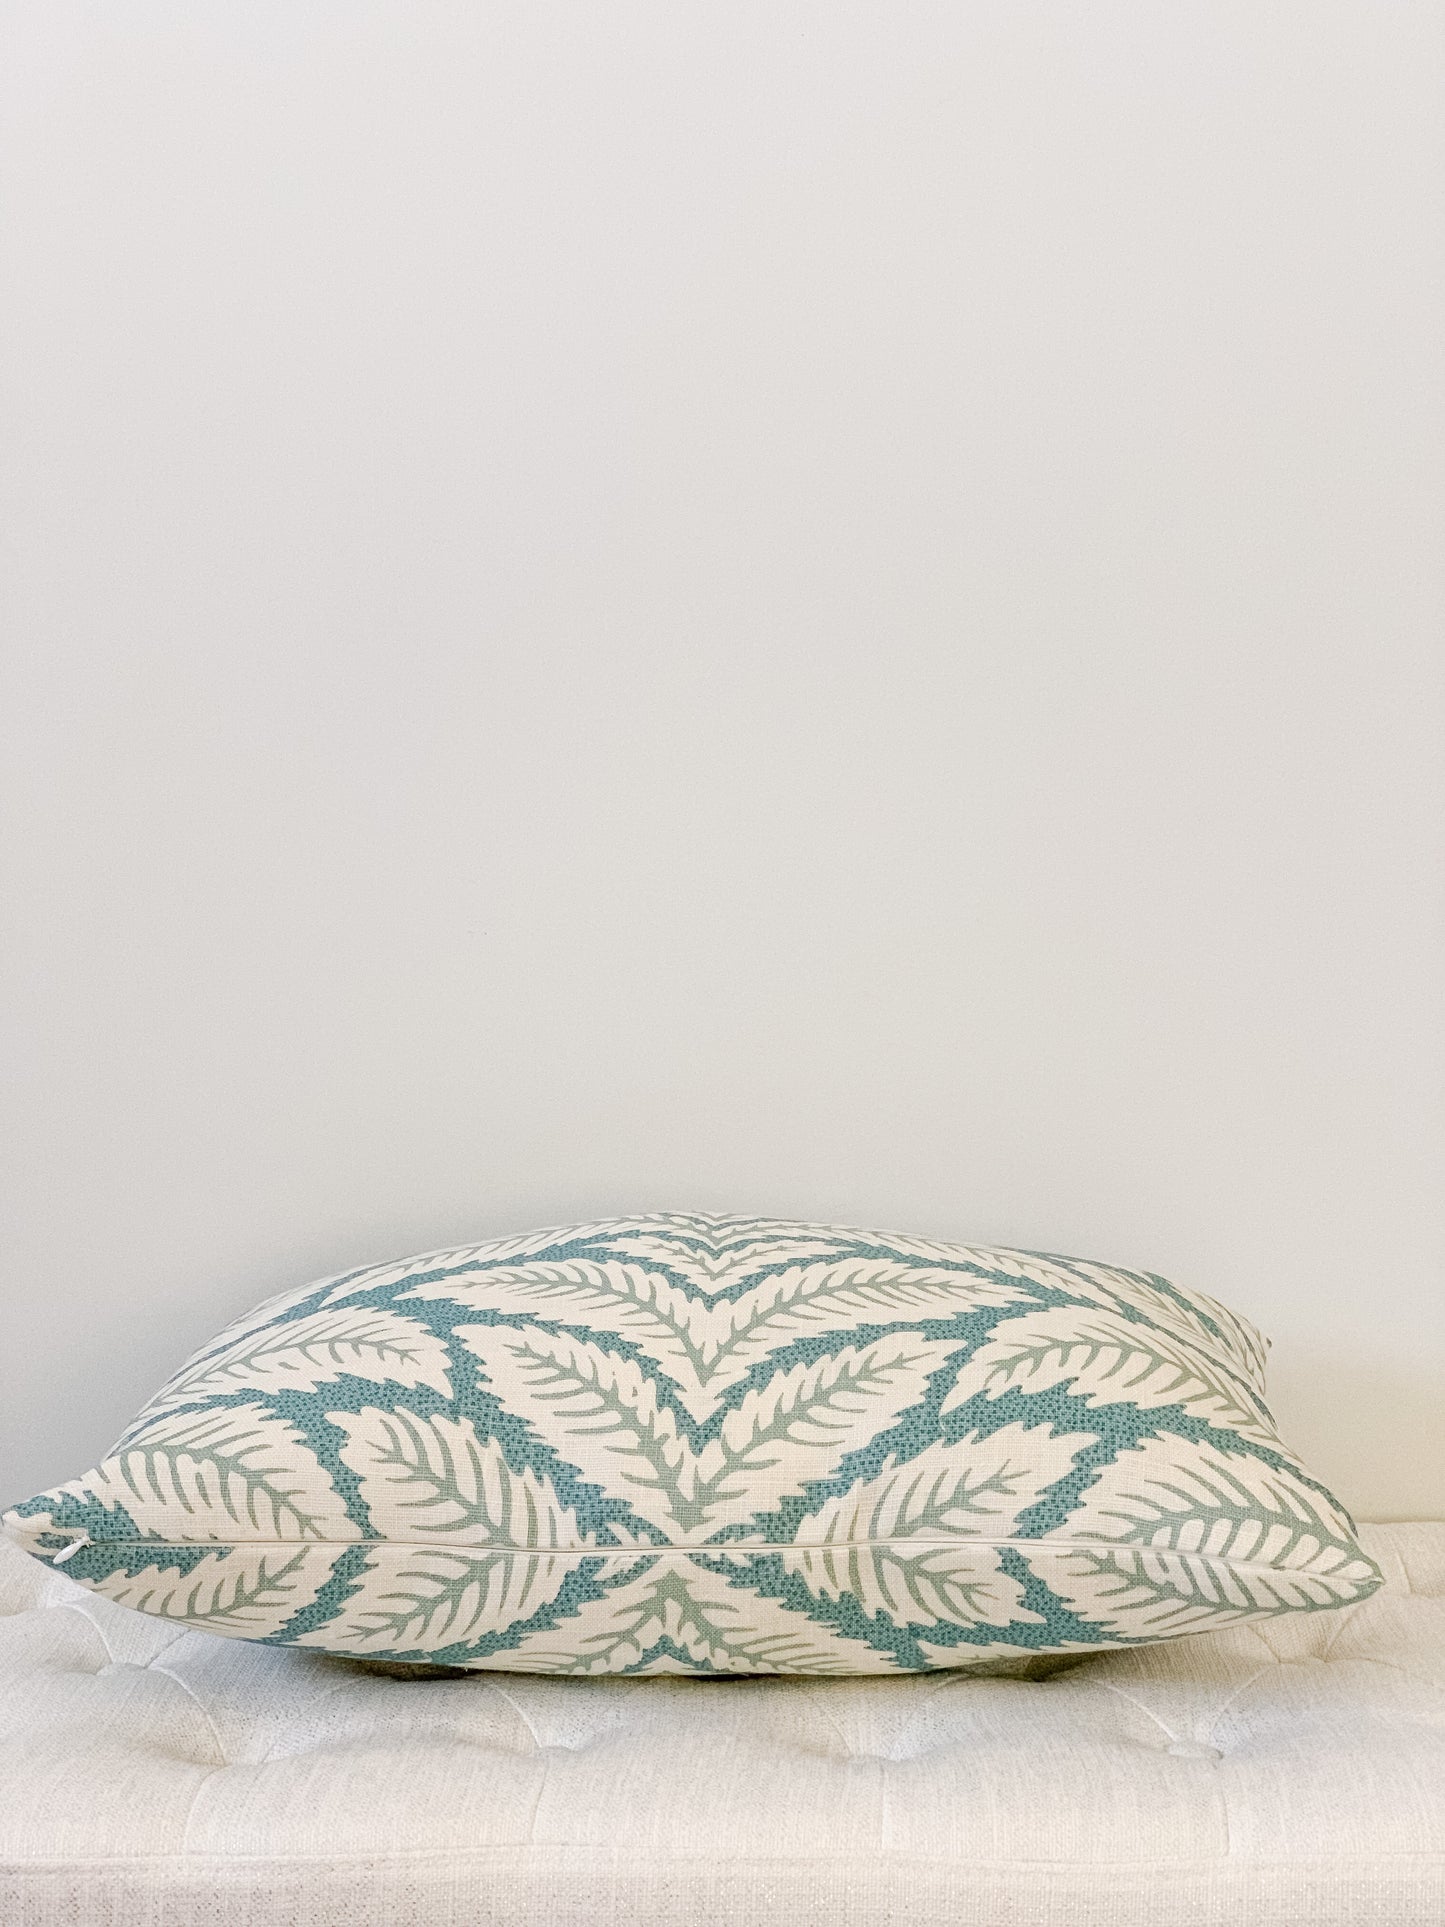 Side view of designer lumbar pillow with palm motif in aqua and cream tones. Large scale geometric.